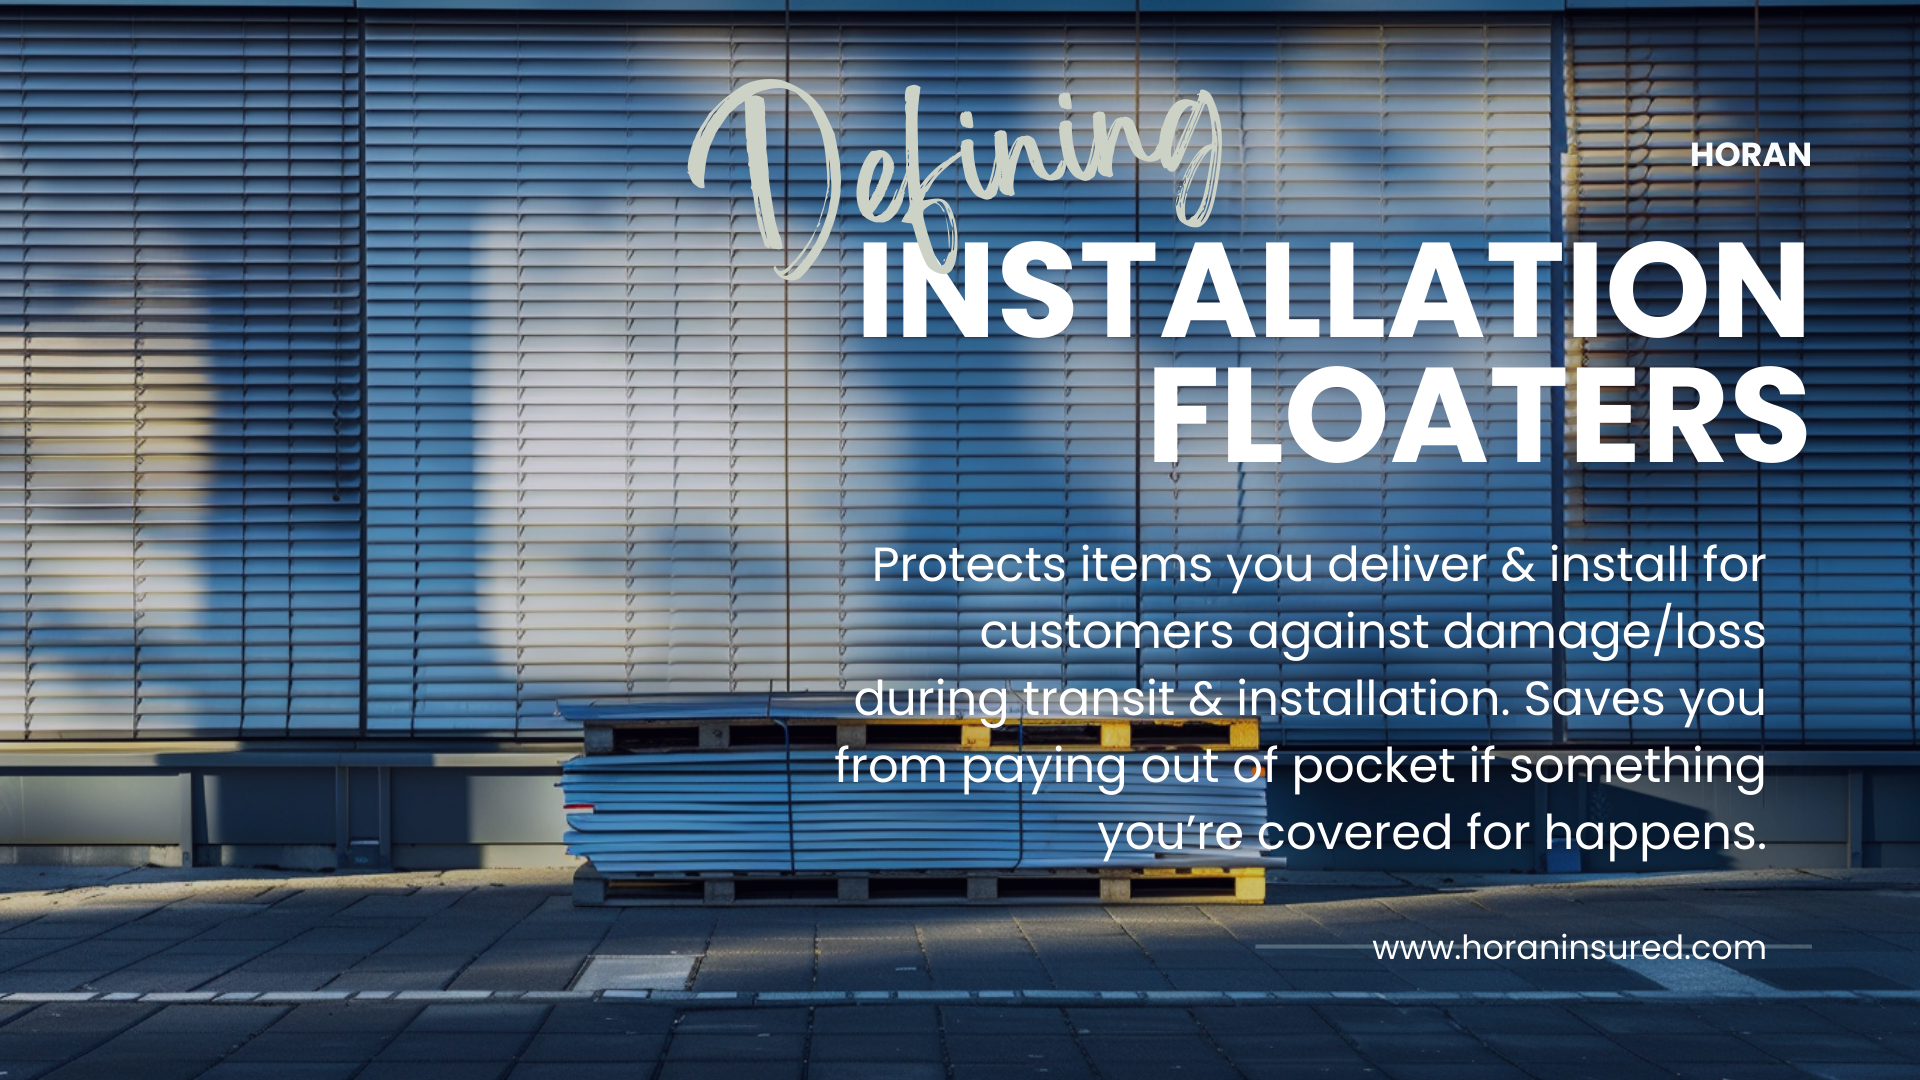 Defining installation floaters